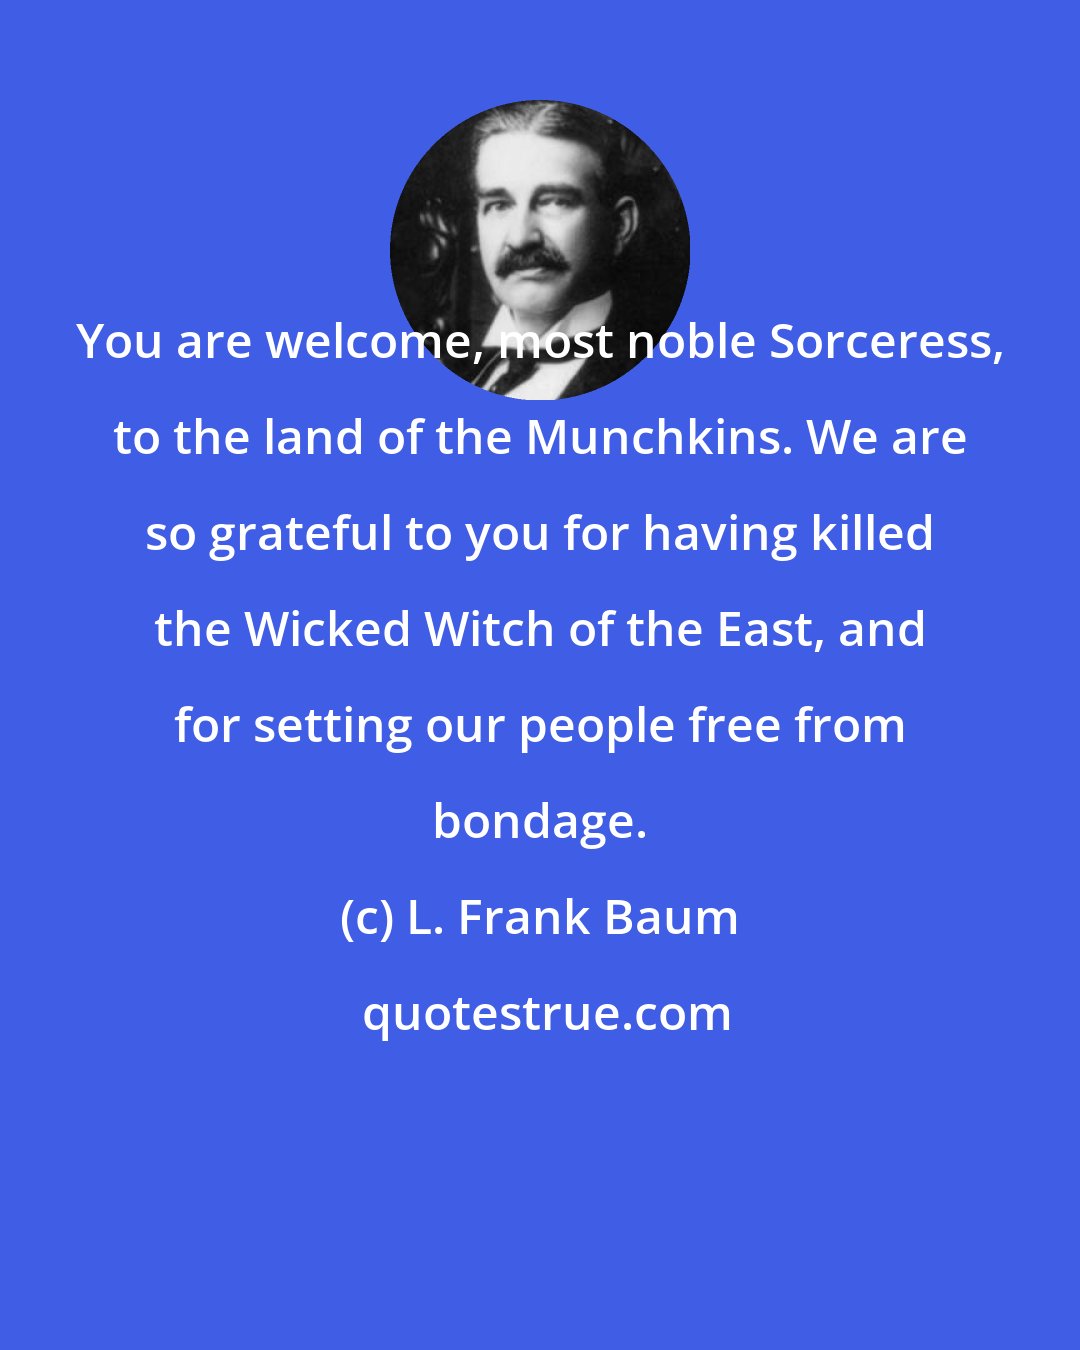 L. Frank Baum: You are welcome, most noble Sorceress, to the land of the Munchkins. We are so grateful to you for having killed the Wicked Witch of the East, and for setting our people free from bondage.